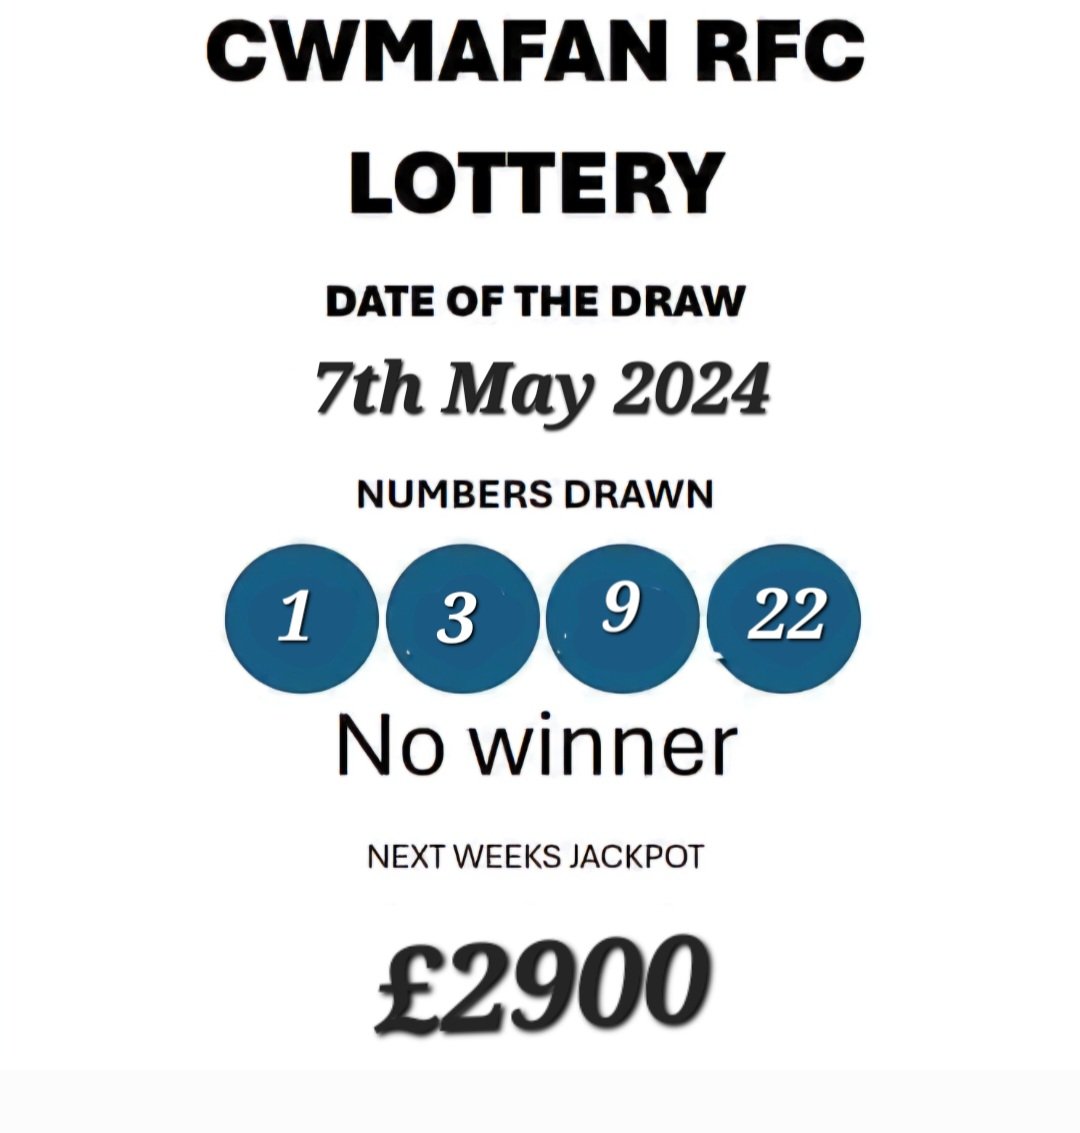 This weeks Lotto numbers, there were no winners so next week's Jackpot is £2900. Remember our Lotto is open to all not just club members so why not call by and pick up a ticket.